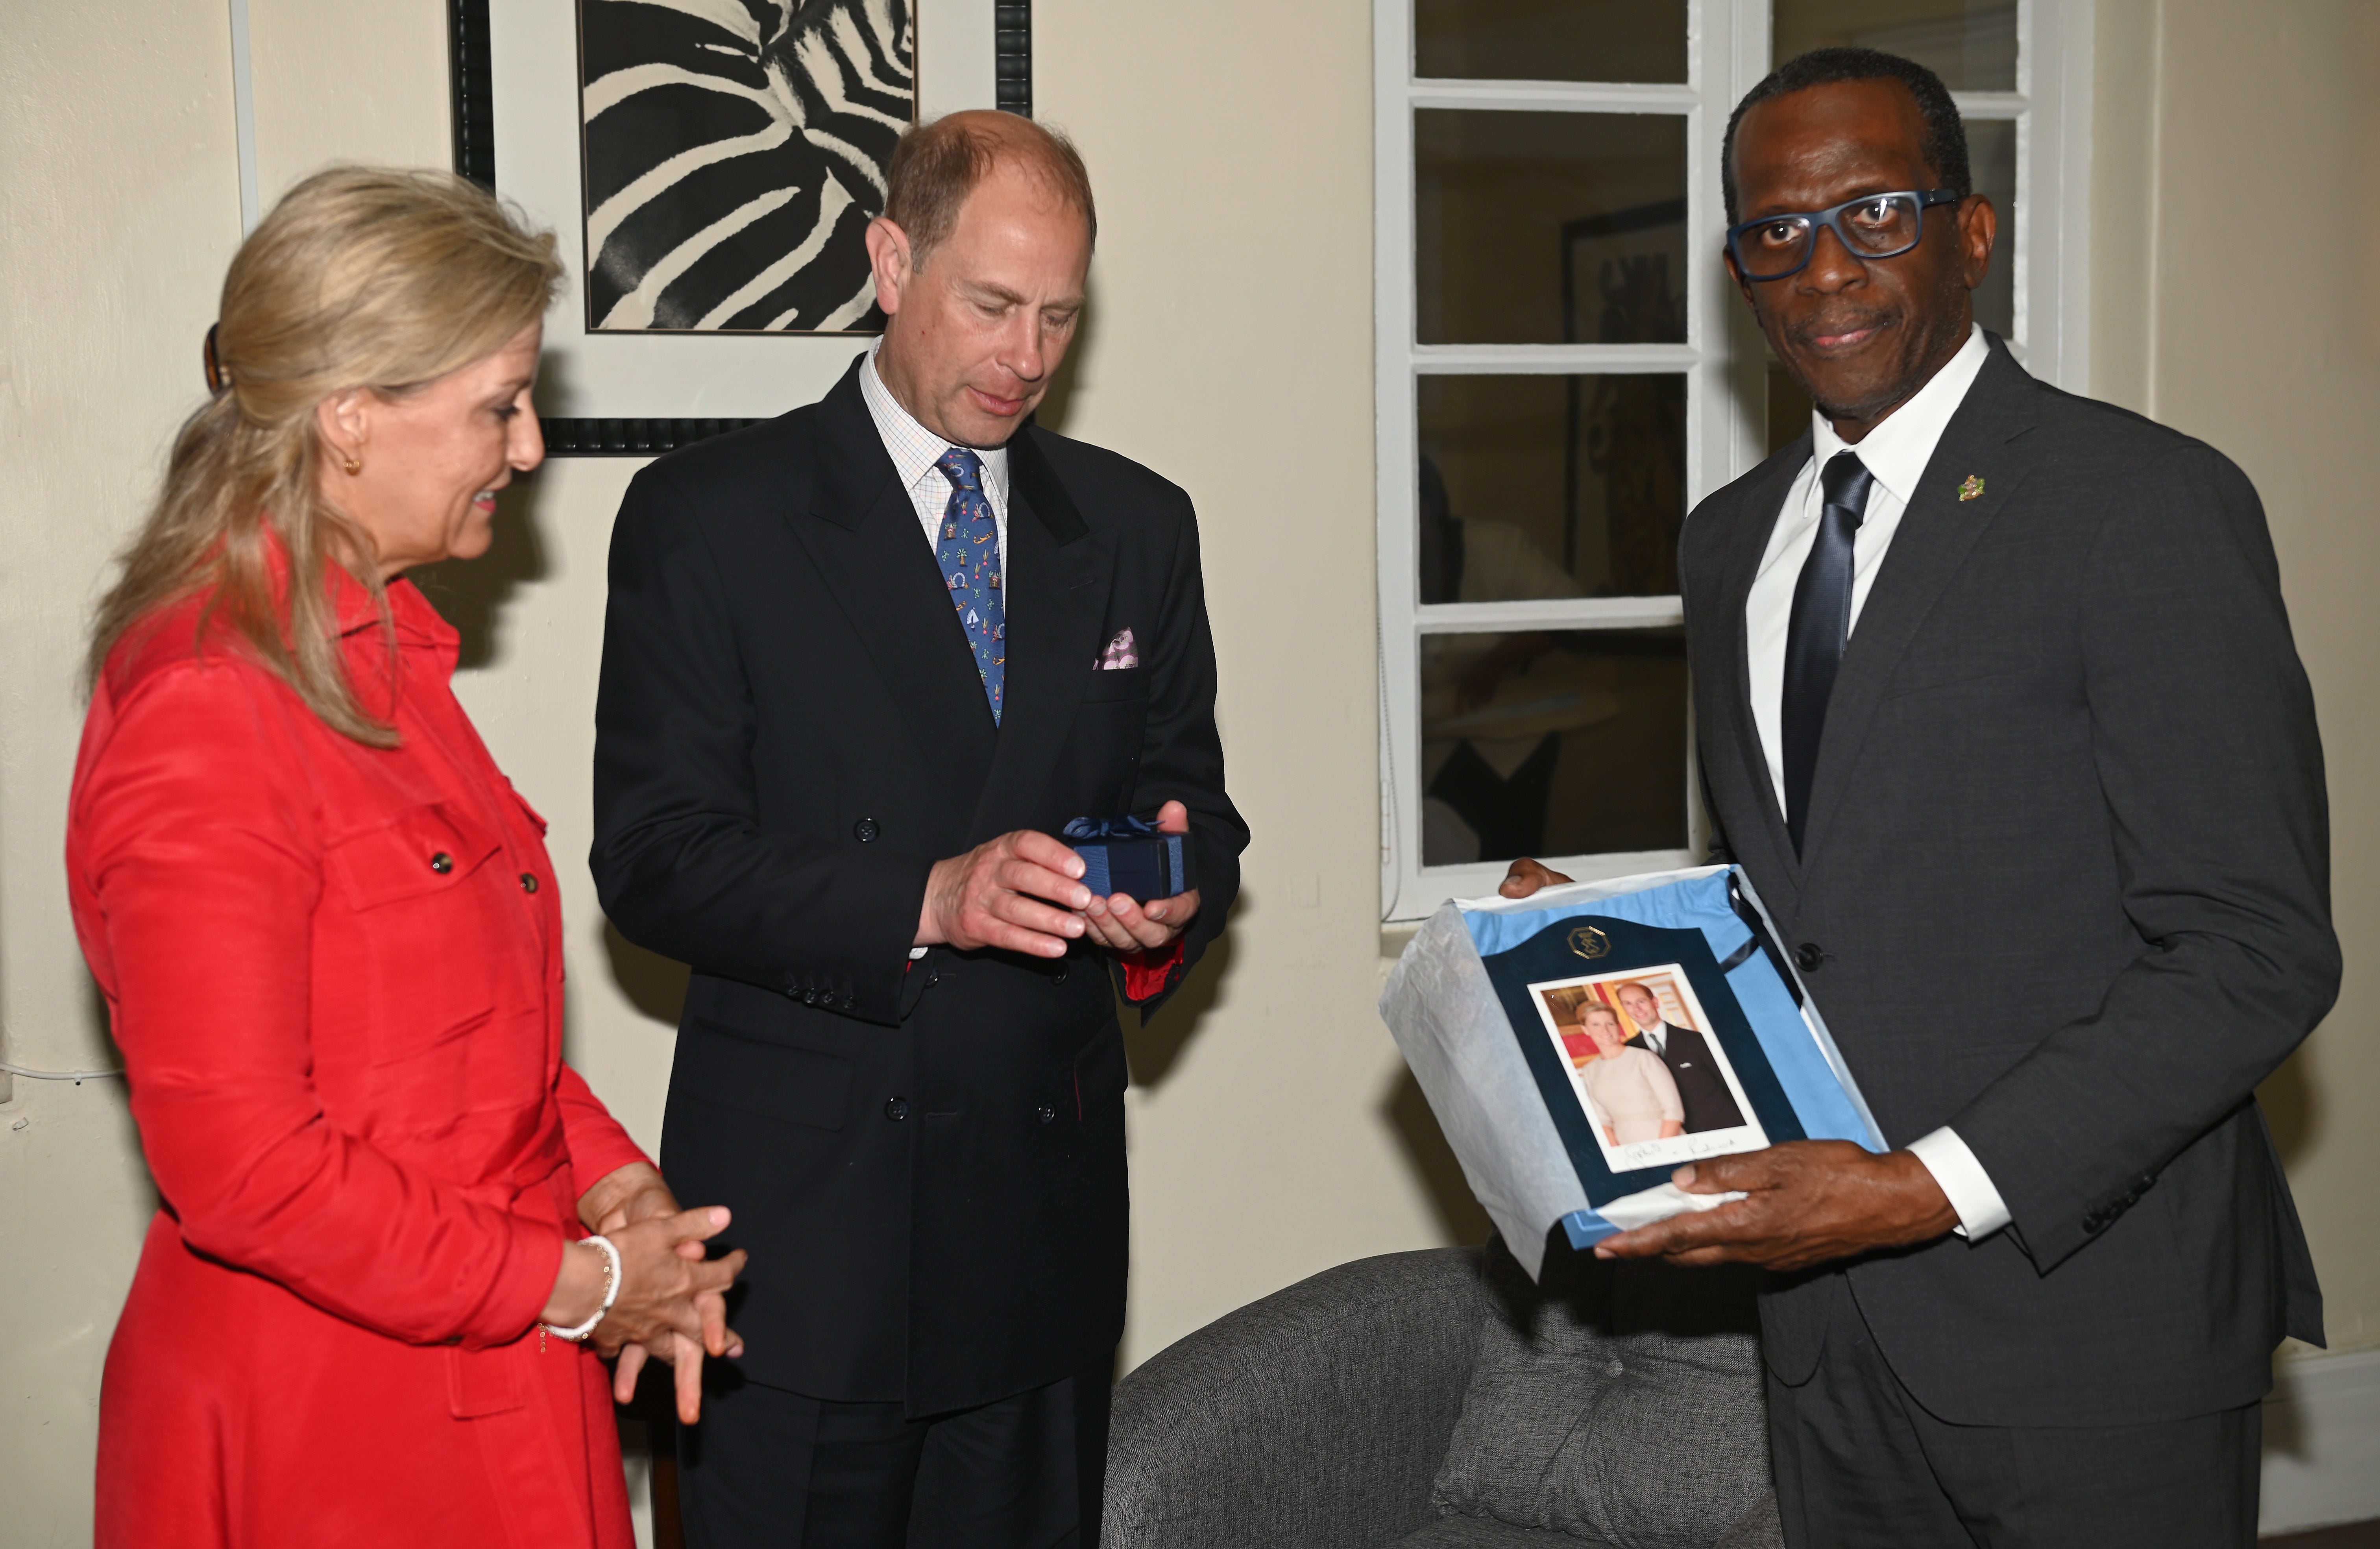 Sophie, Countess of Wessex, Prince Edward, Earl of Wessex and Philip Pierre, Prime Minister of Saint Lucia present gifts to each other during a reception on day one of their Platinum Jubilee Royal Tour of the Caribbean at the Prime Minister’s residence on April 22, 2022 in Castries, Saint Lucia.